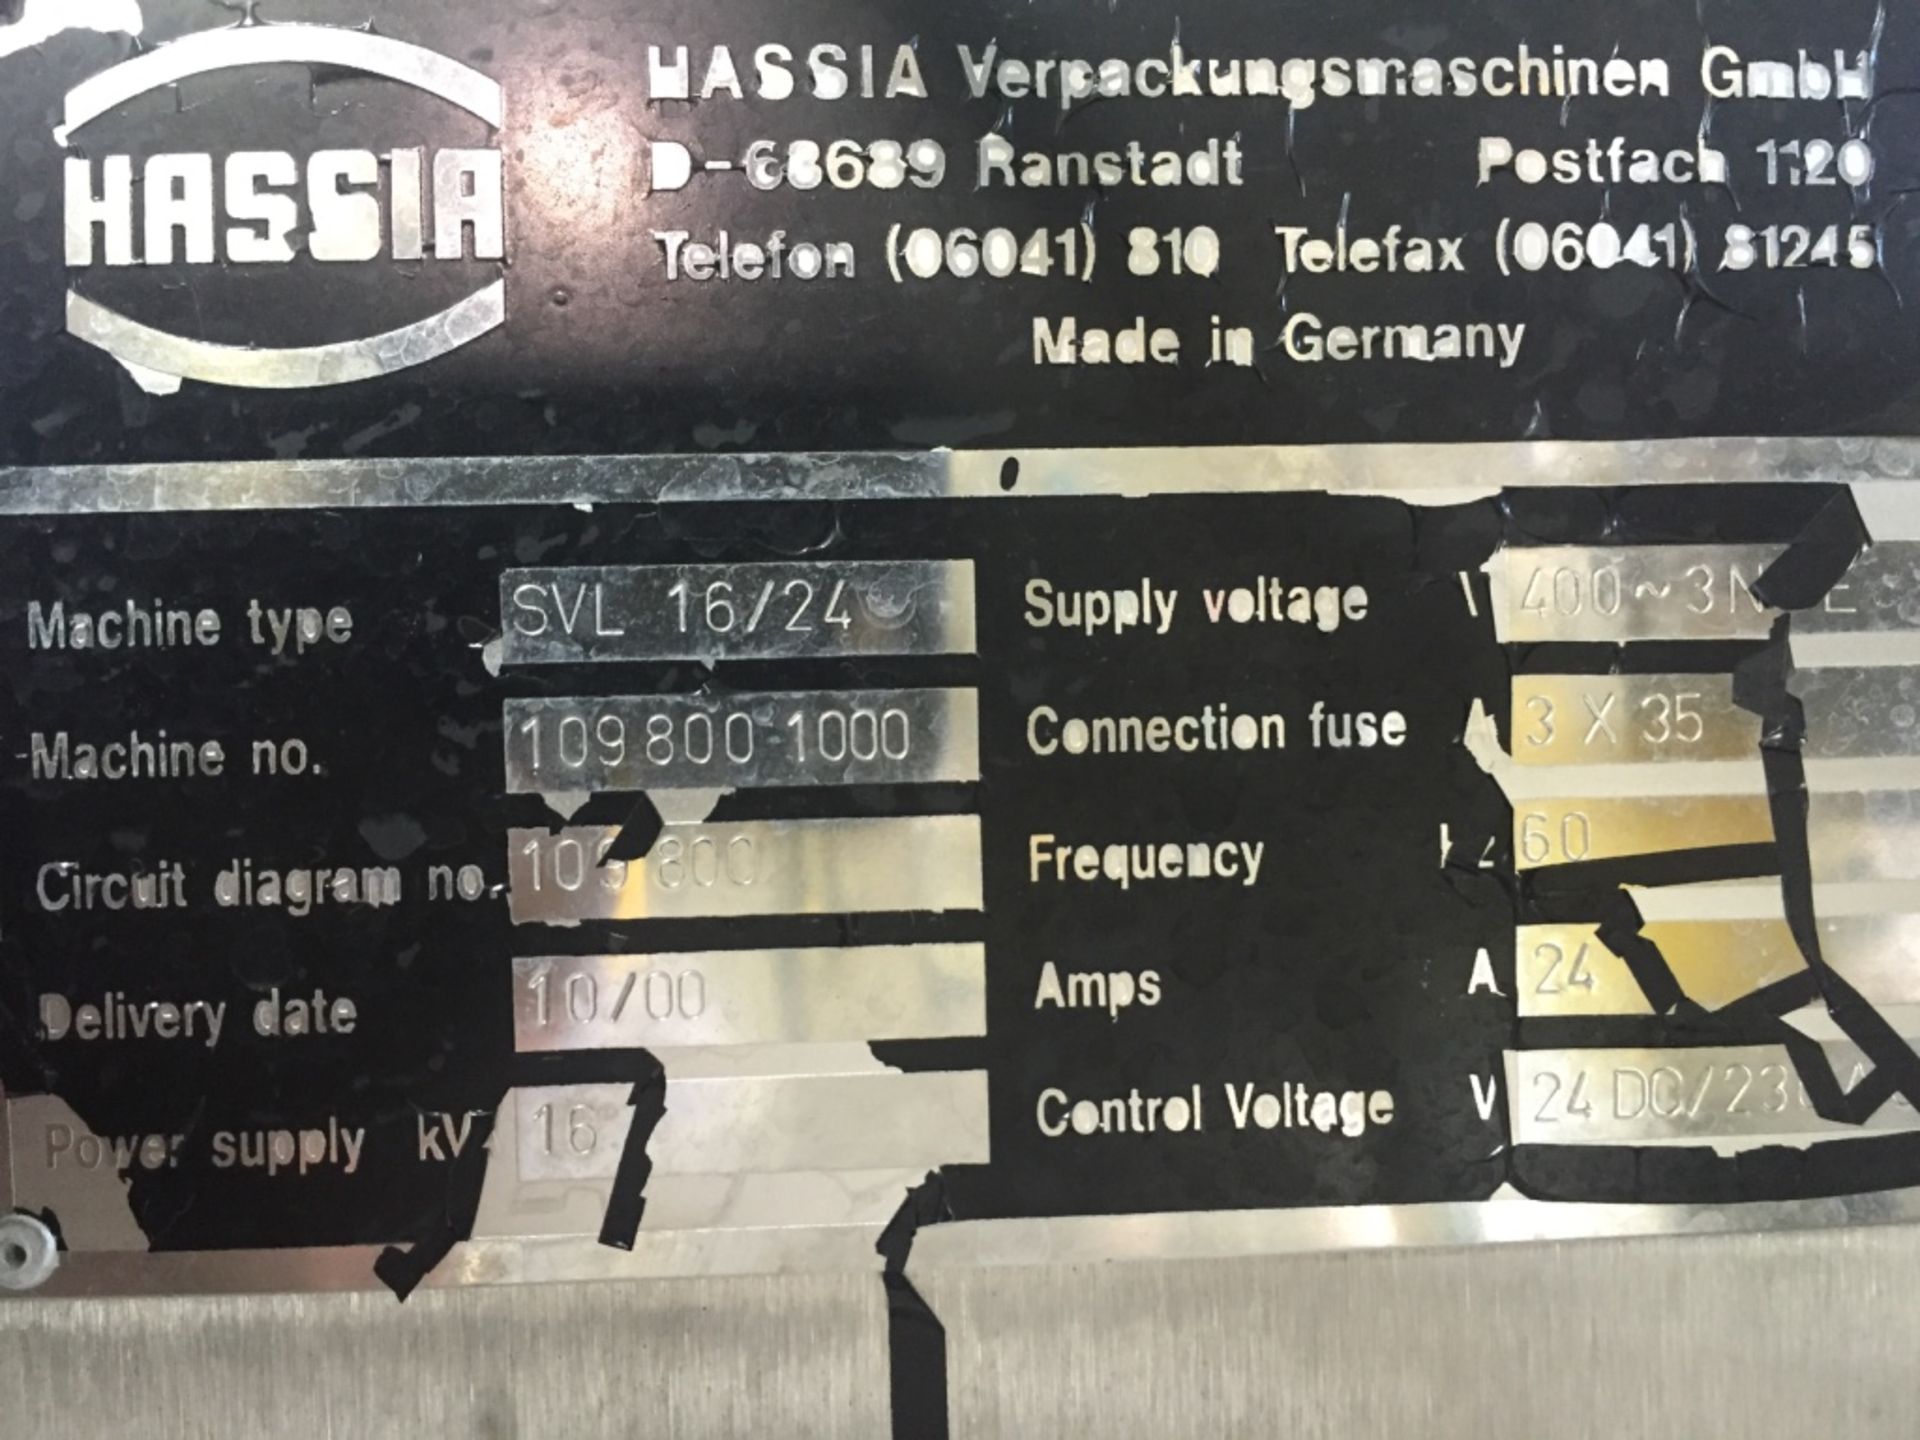 Hassia StickPack VFFS. Model SVL 16/24, Serial 109800-1000 (Located in New York) Loading Included in - Image 9 of 10